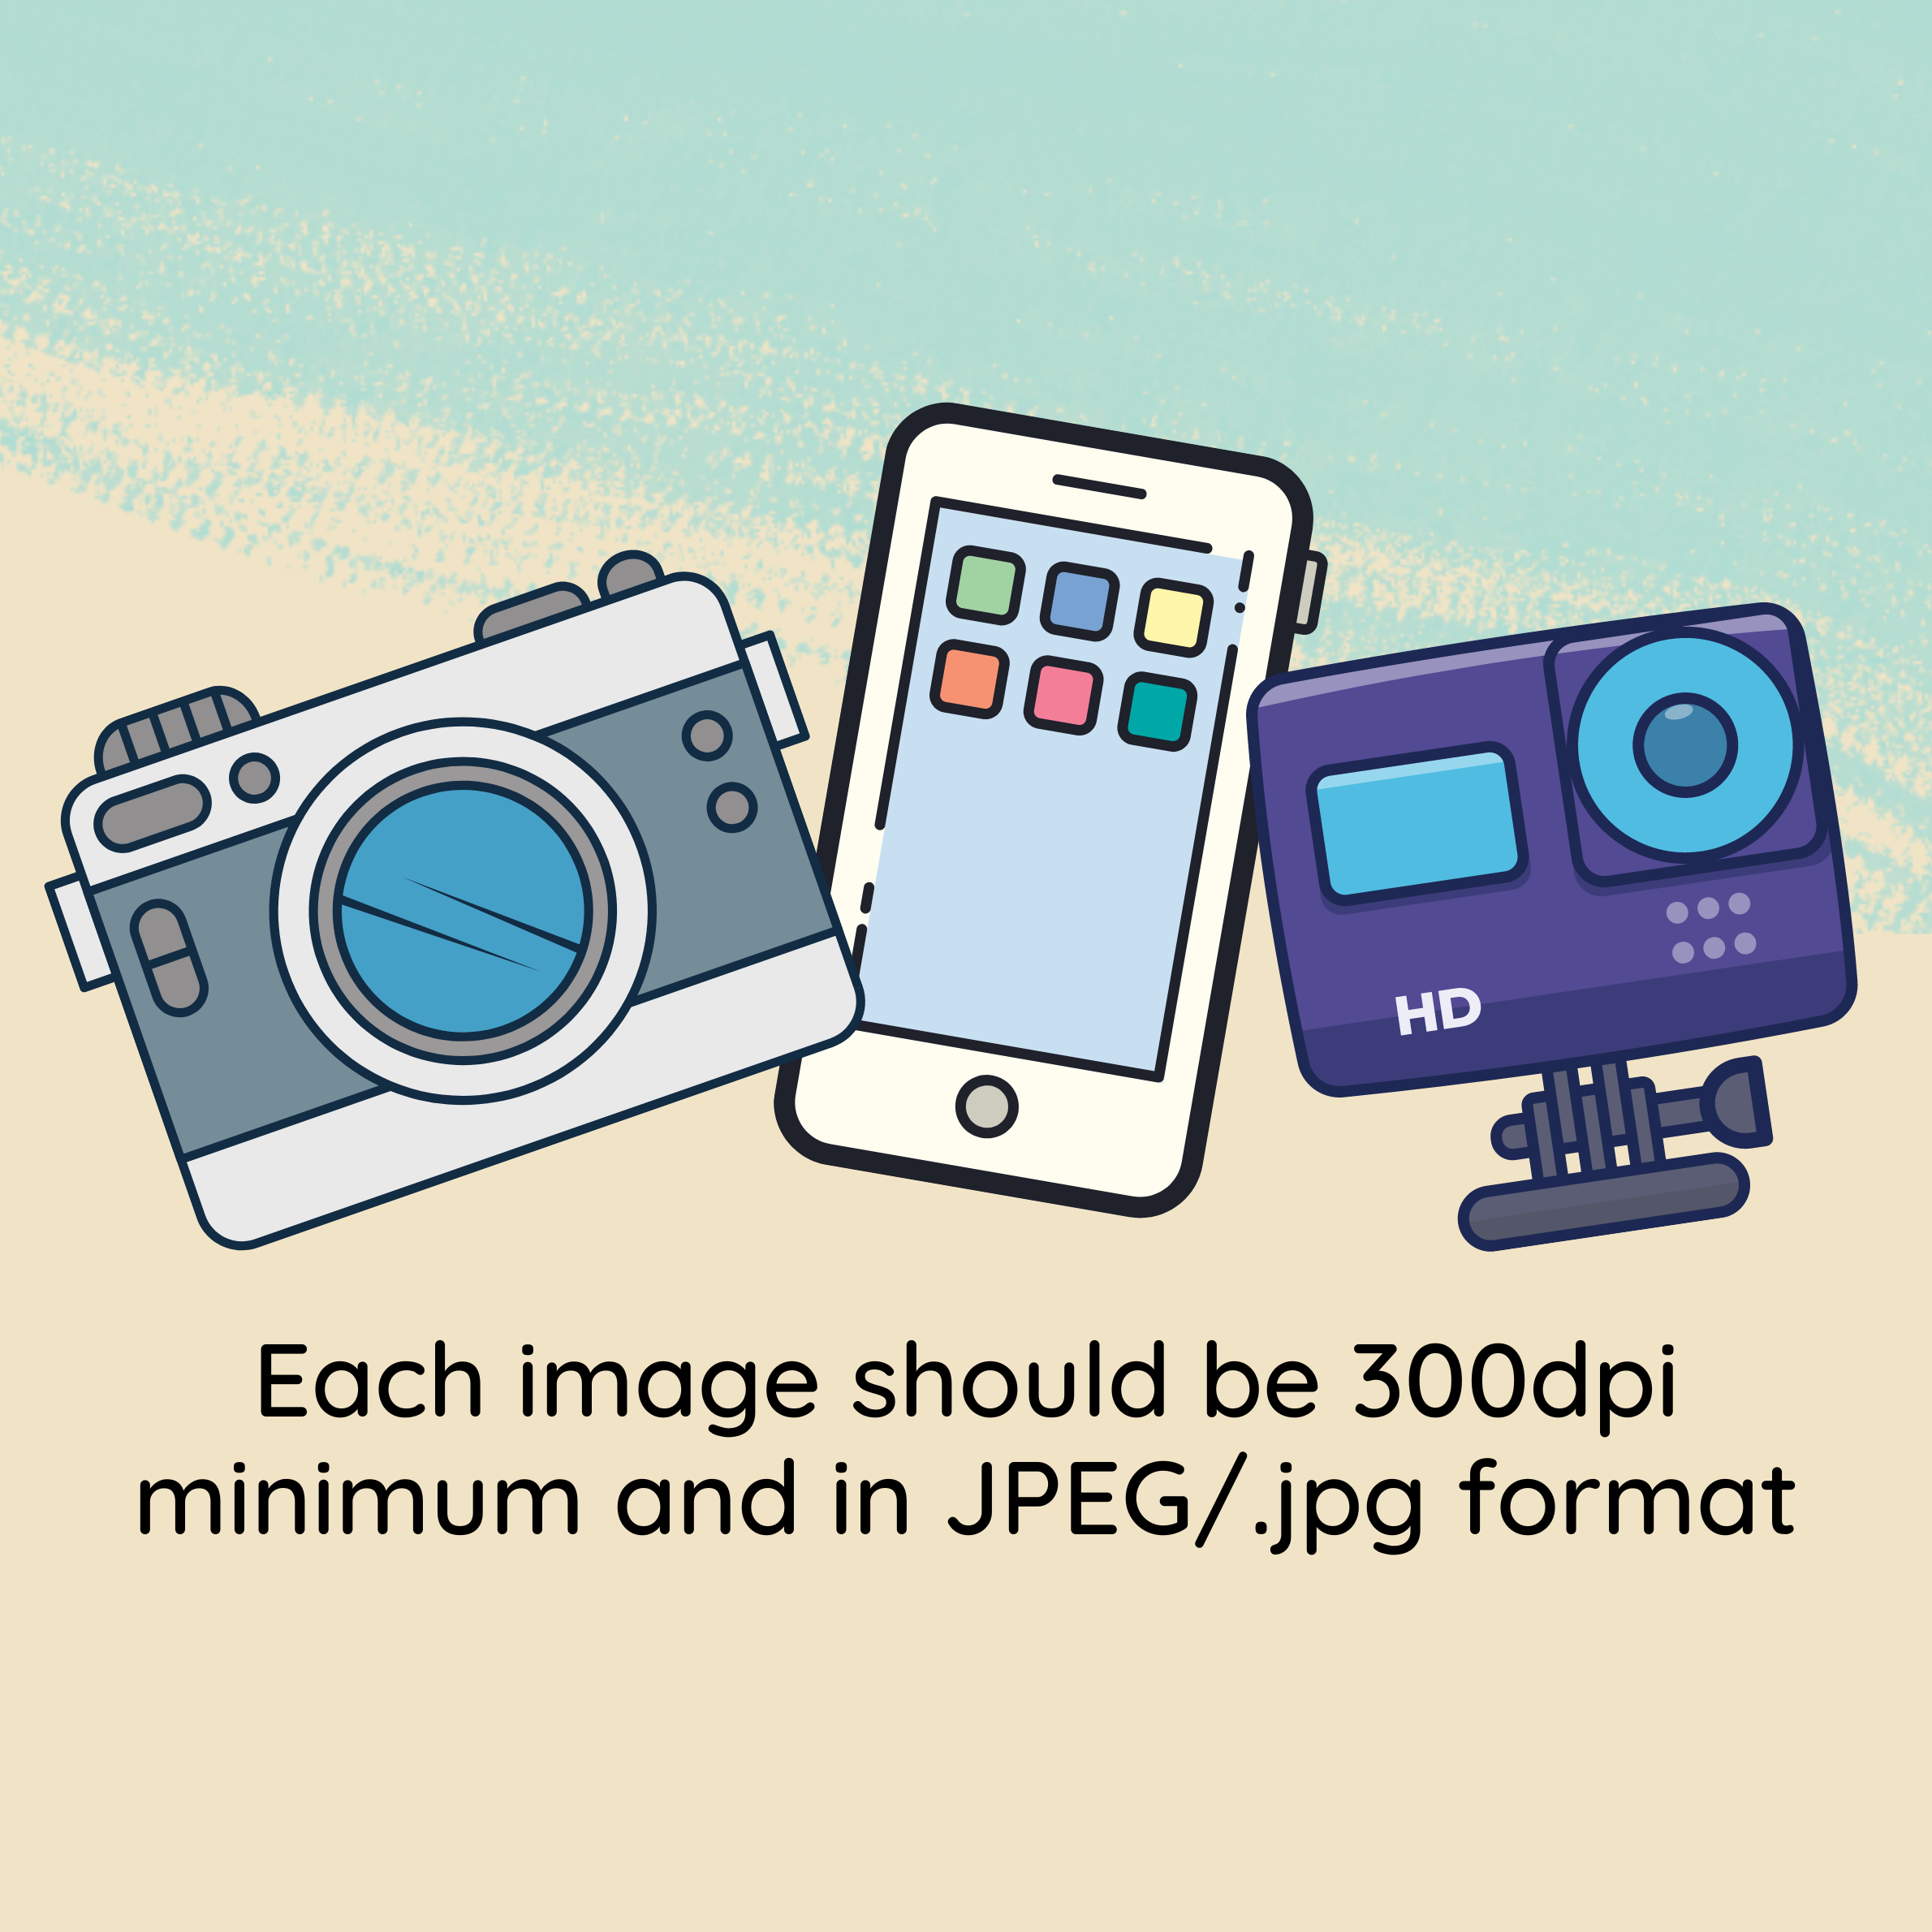 Each image should be 300dpi minimum and in JPEG/.jpg format